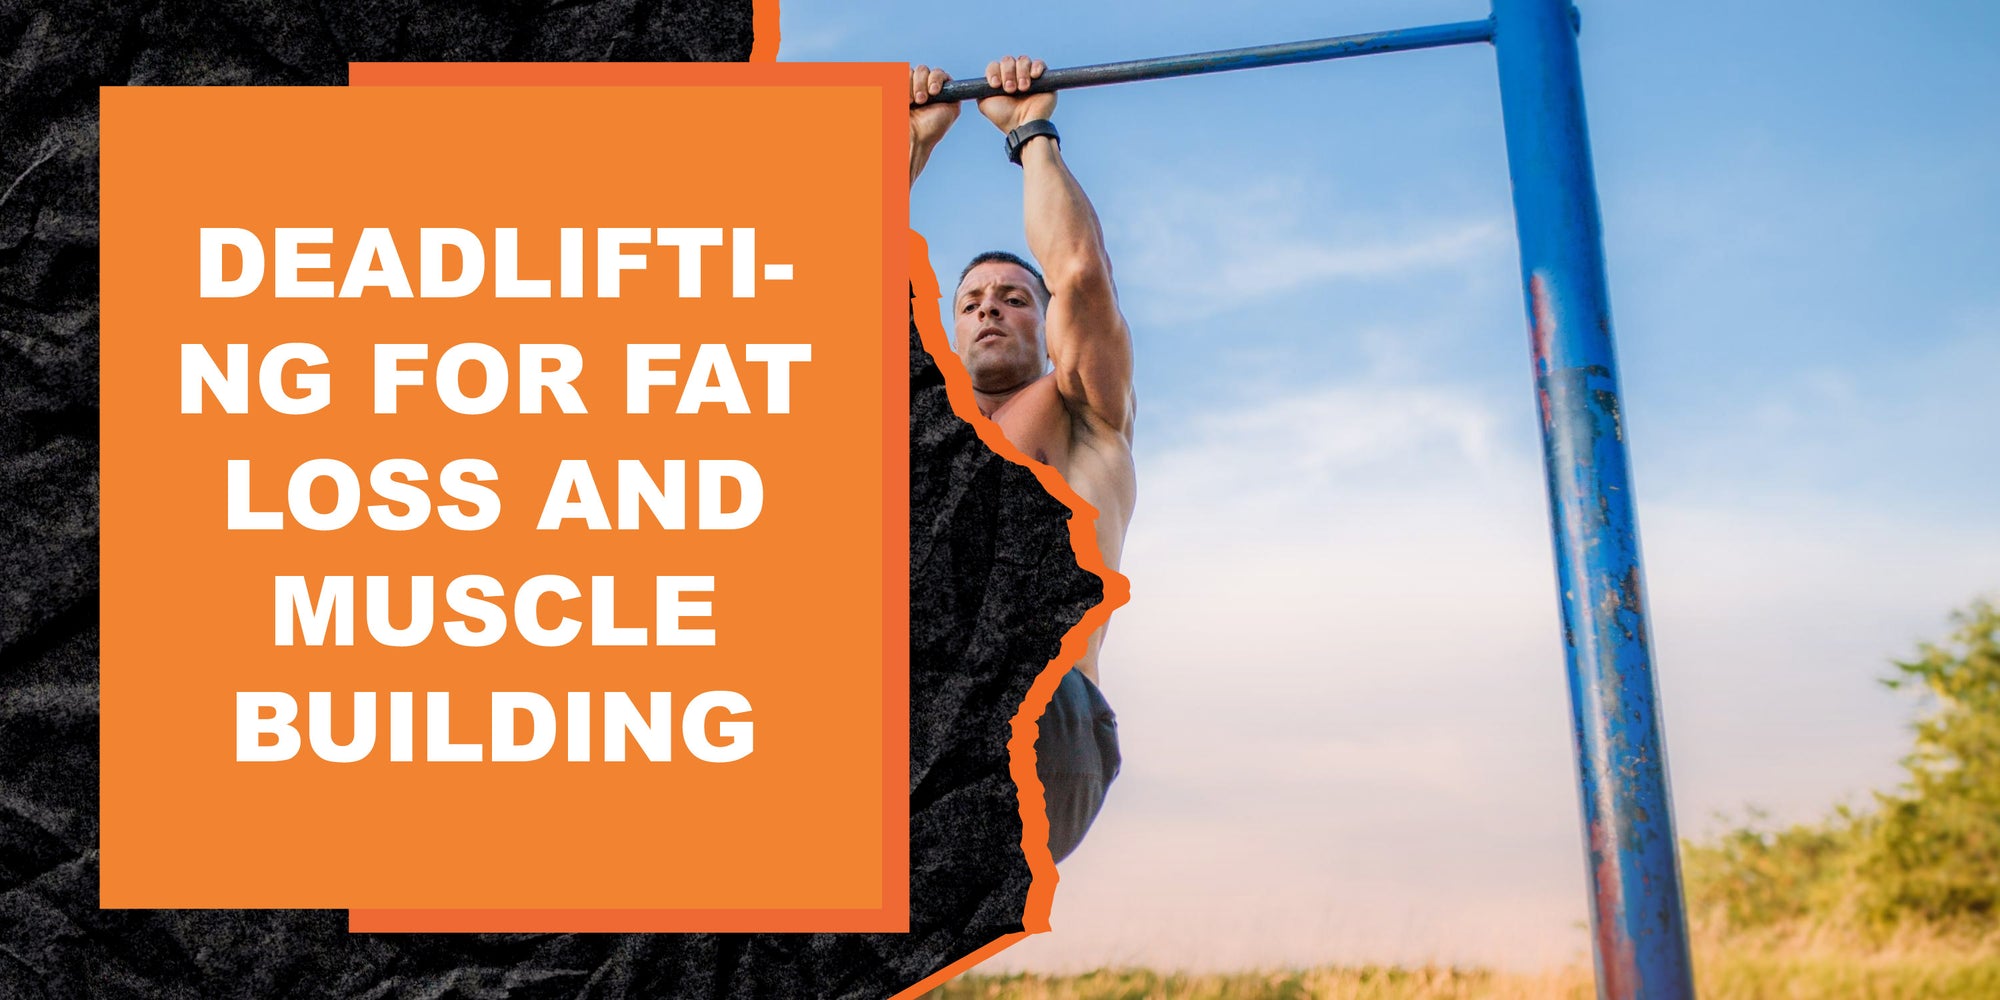 Deadlifting for Fat Loss and Muscle Building